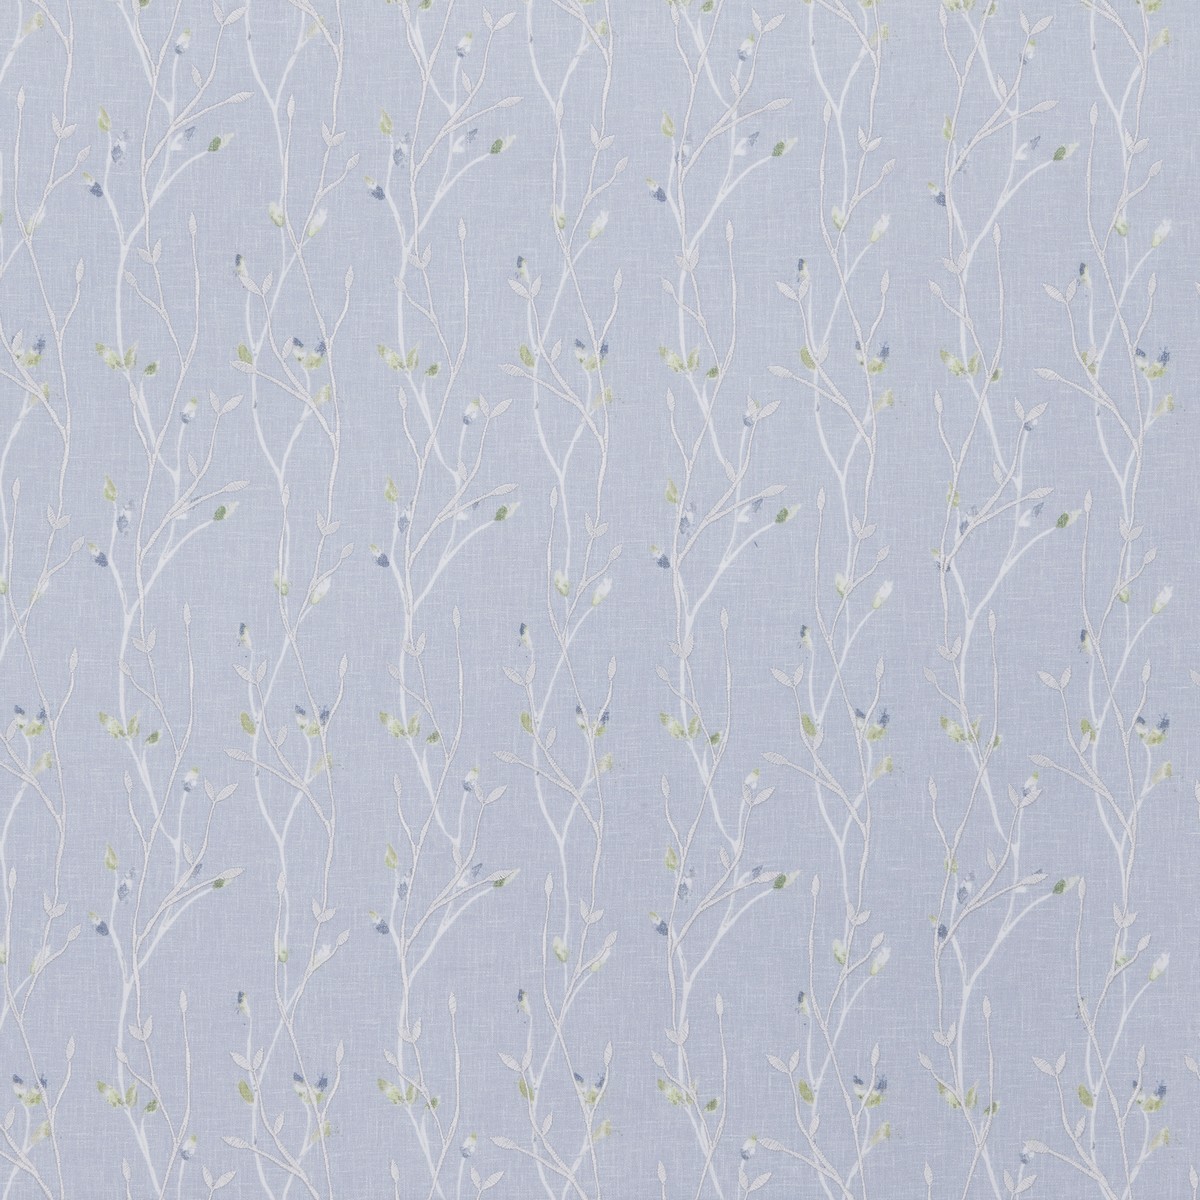 Ivy Bluebell Fabric by Ashley Wilde